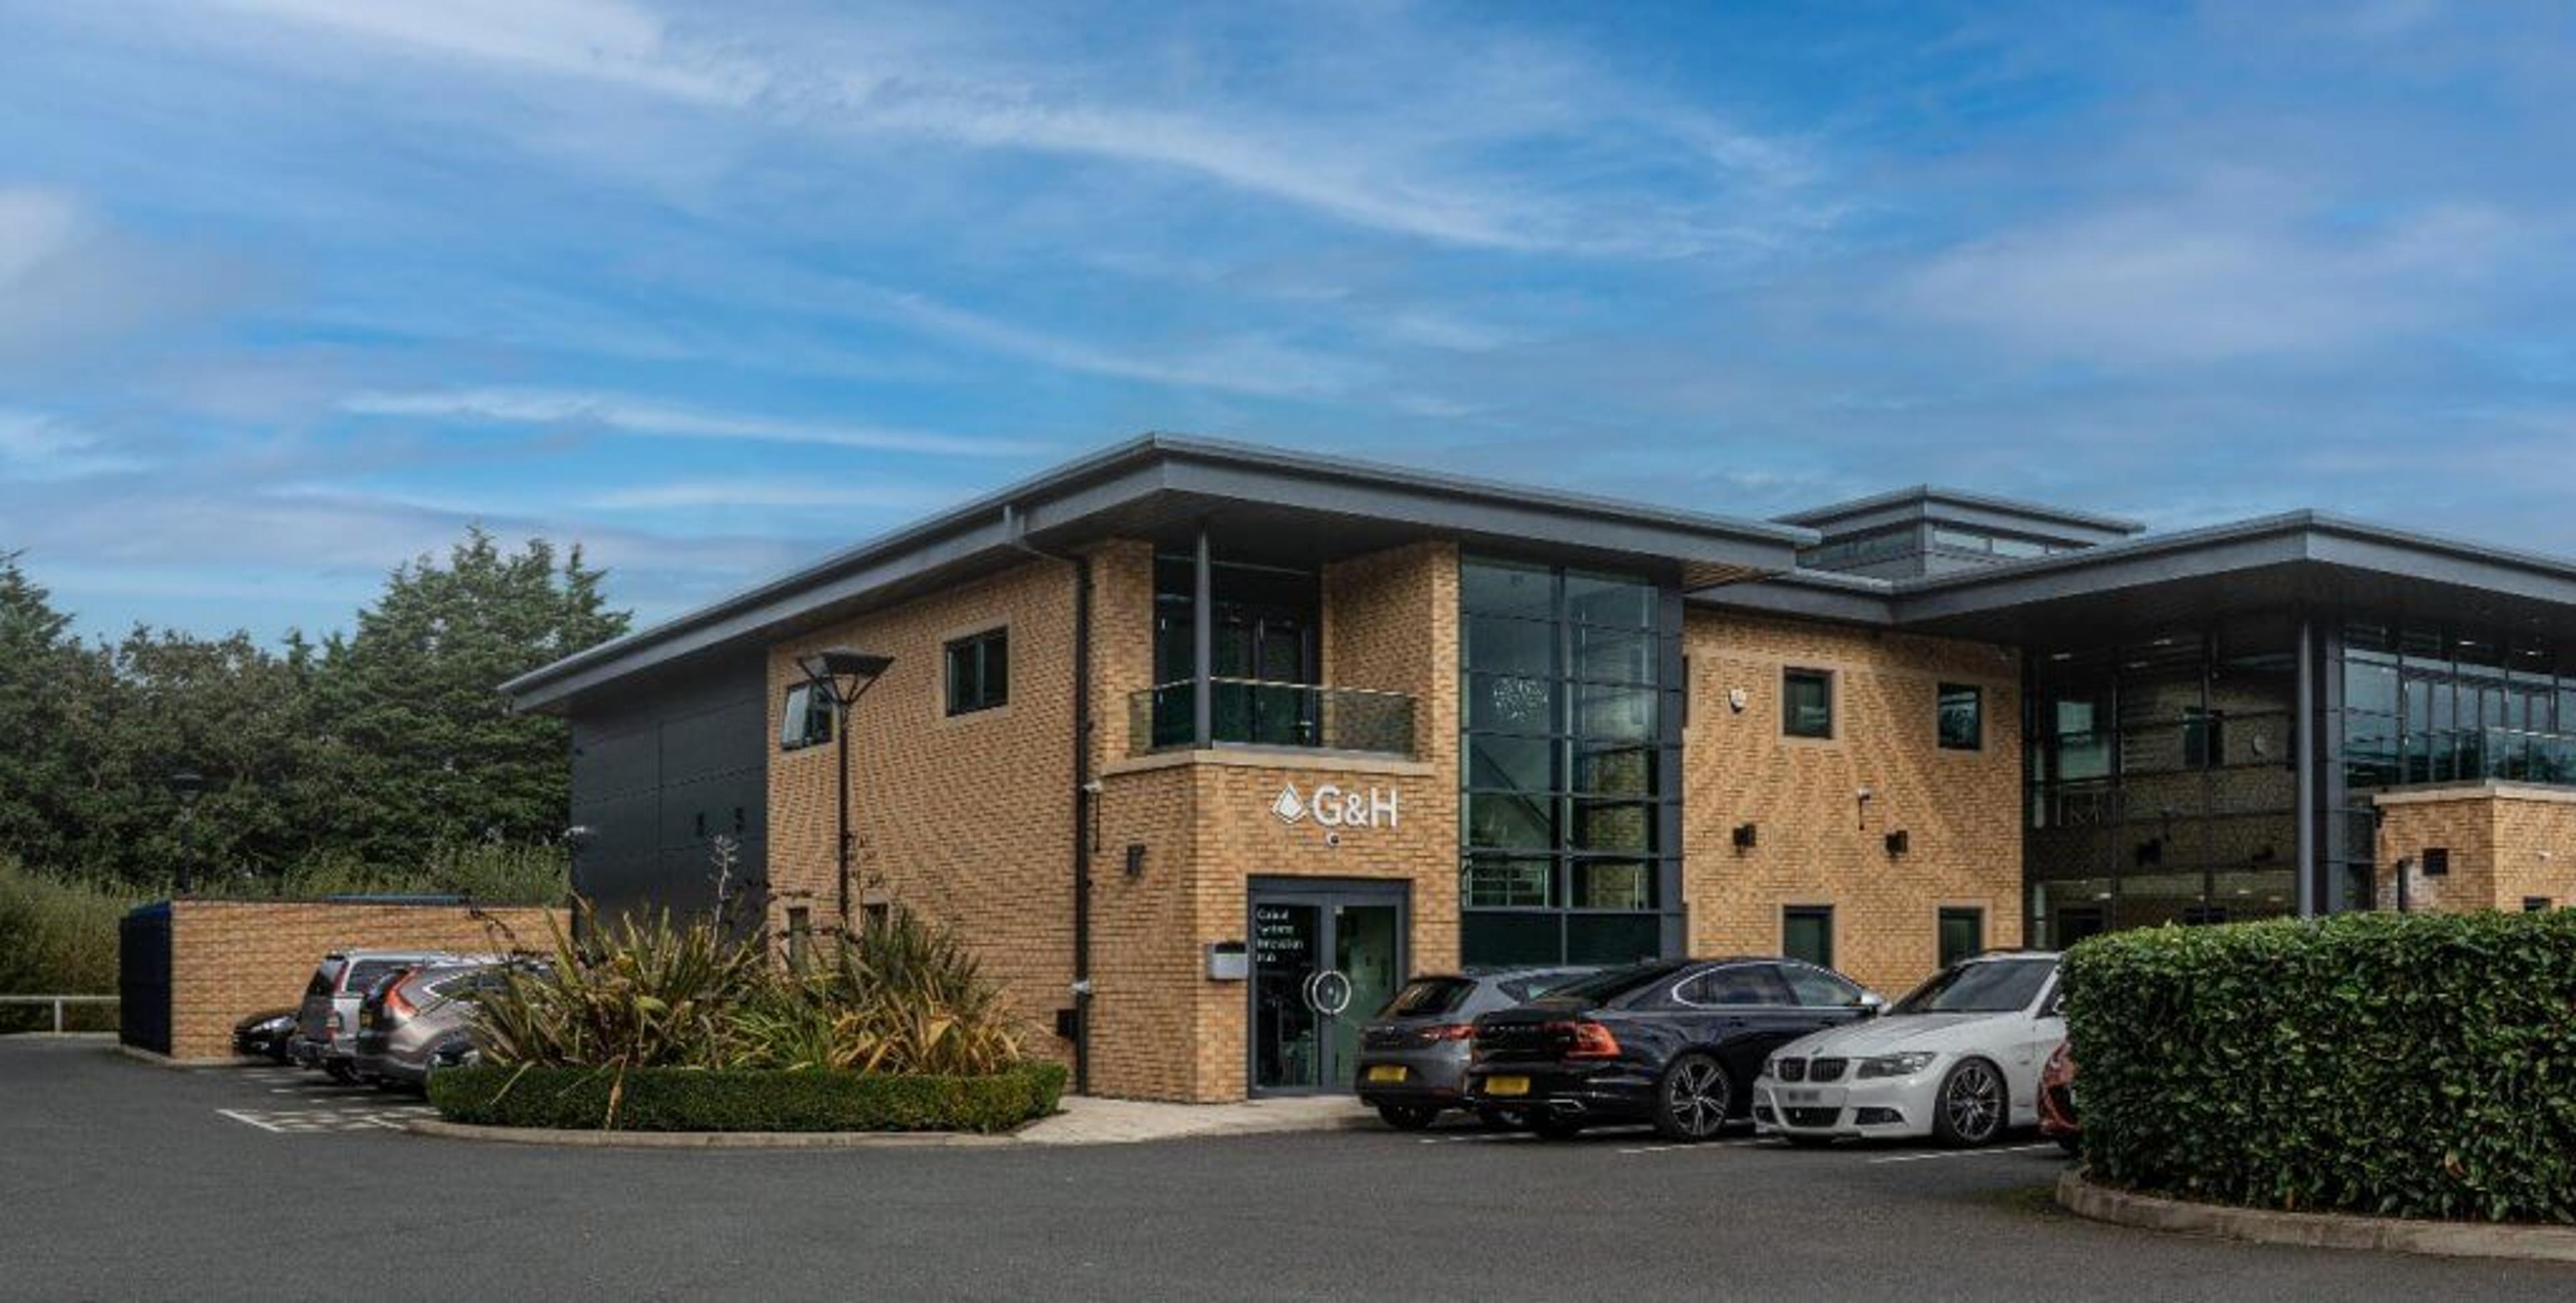 G&H facility in St Asaph, UK, housing the Optical Systems Innovation Hub.